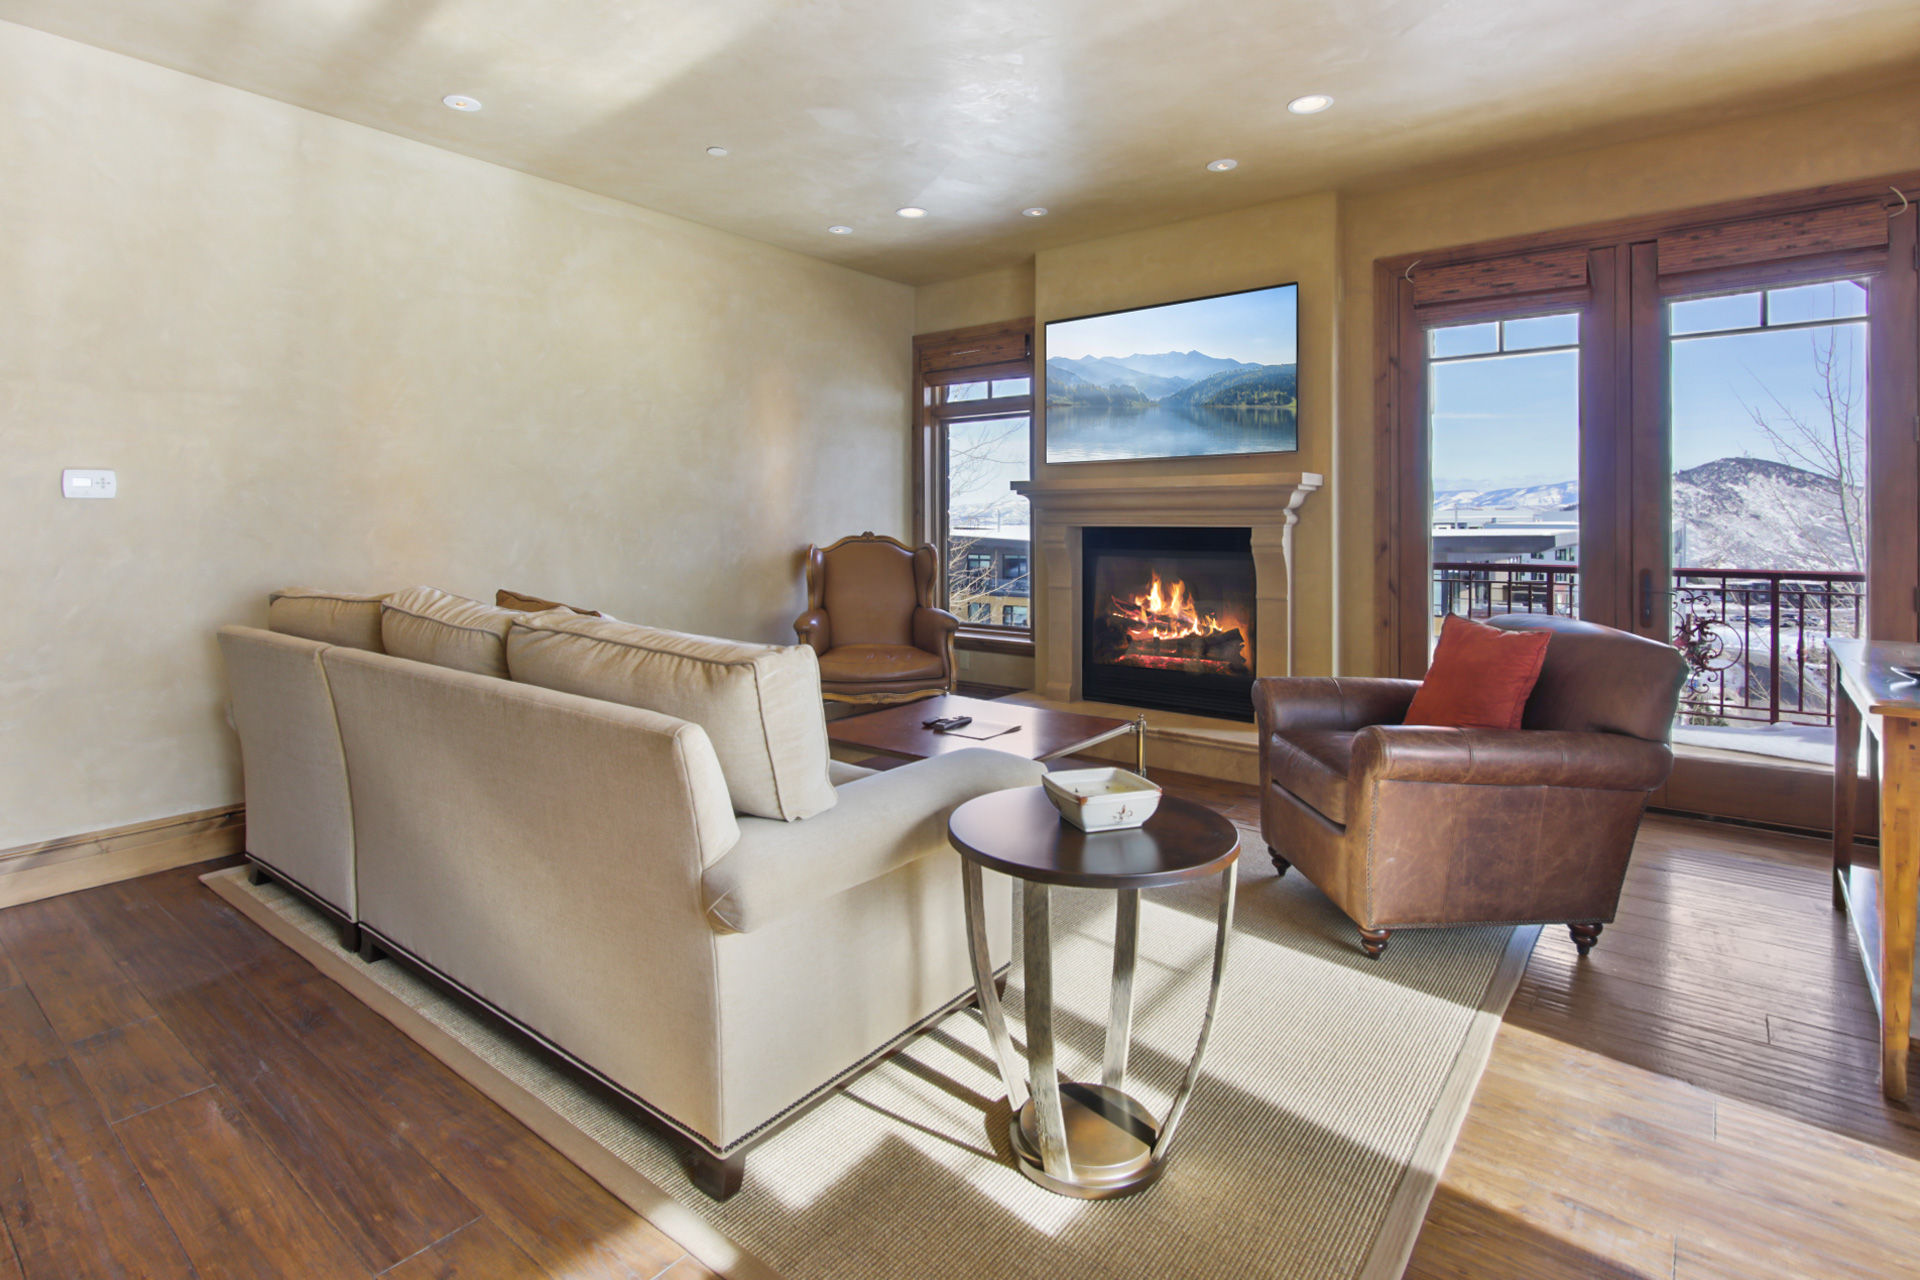 Living room with flatscreen TV and fireplace